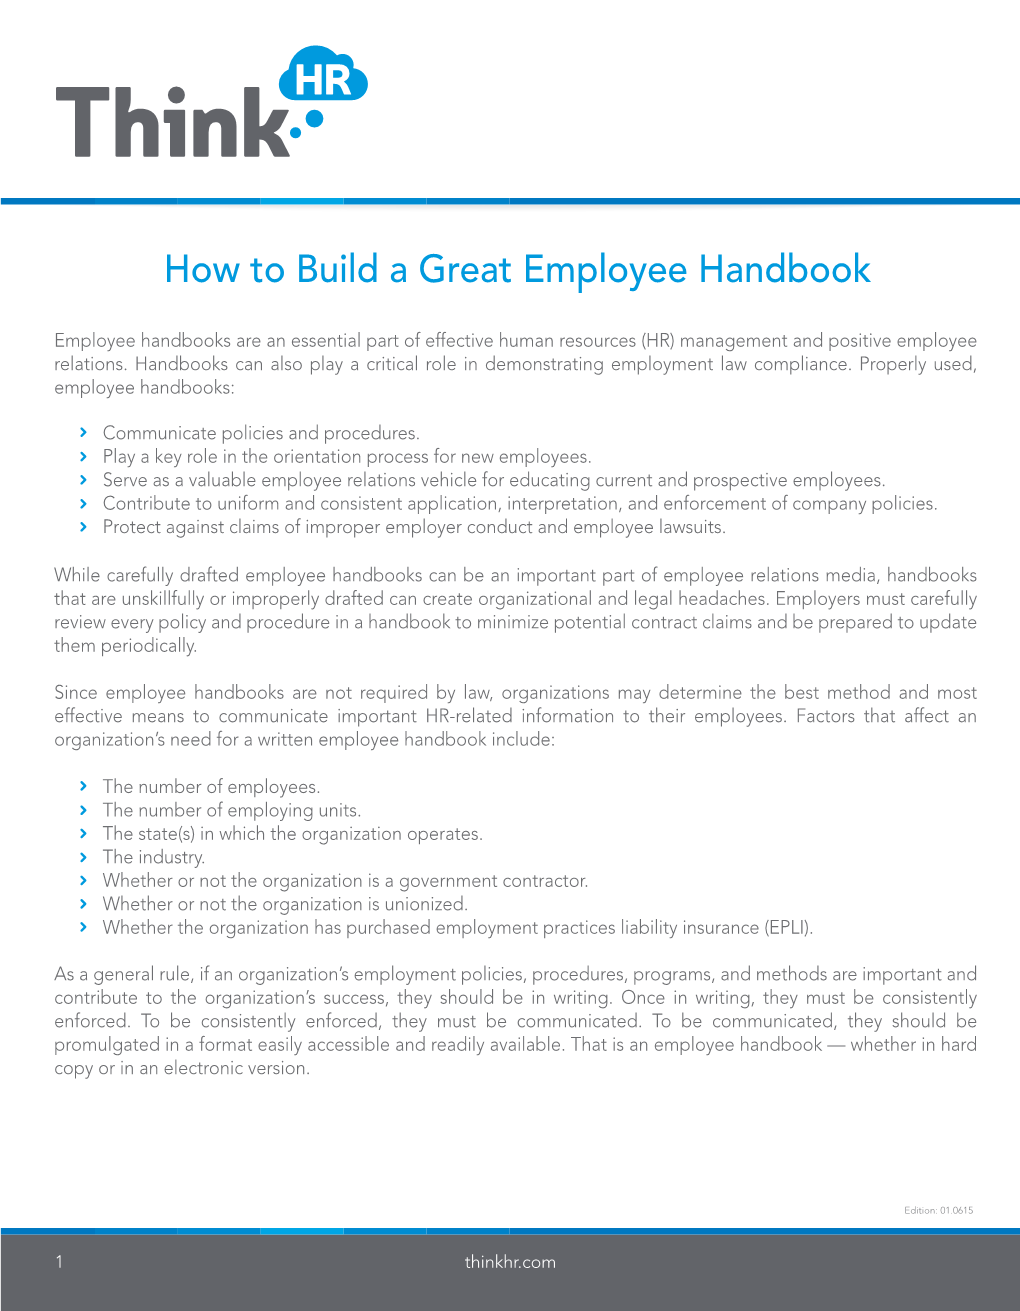 How to Build a Great Employee Handbook